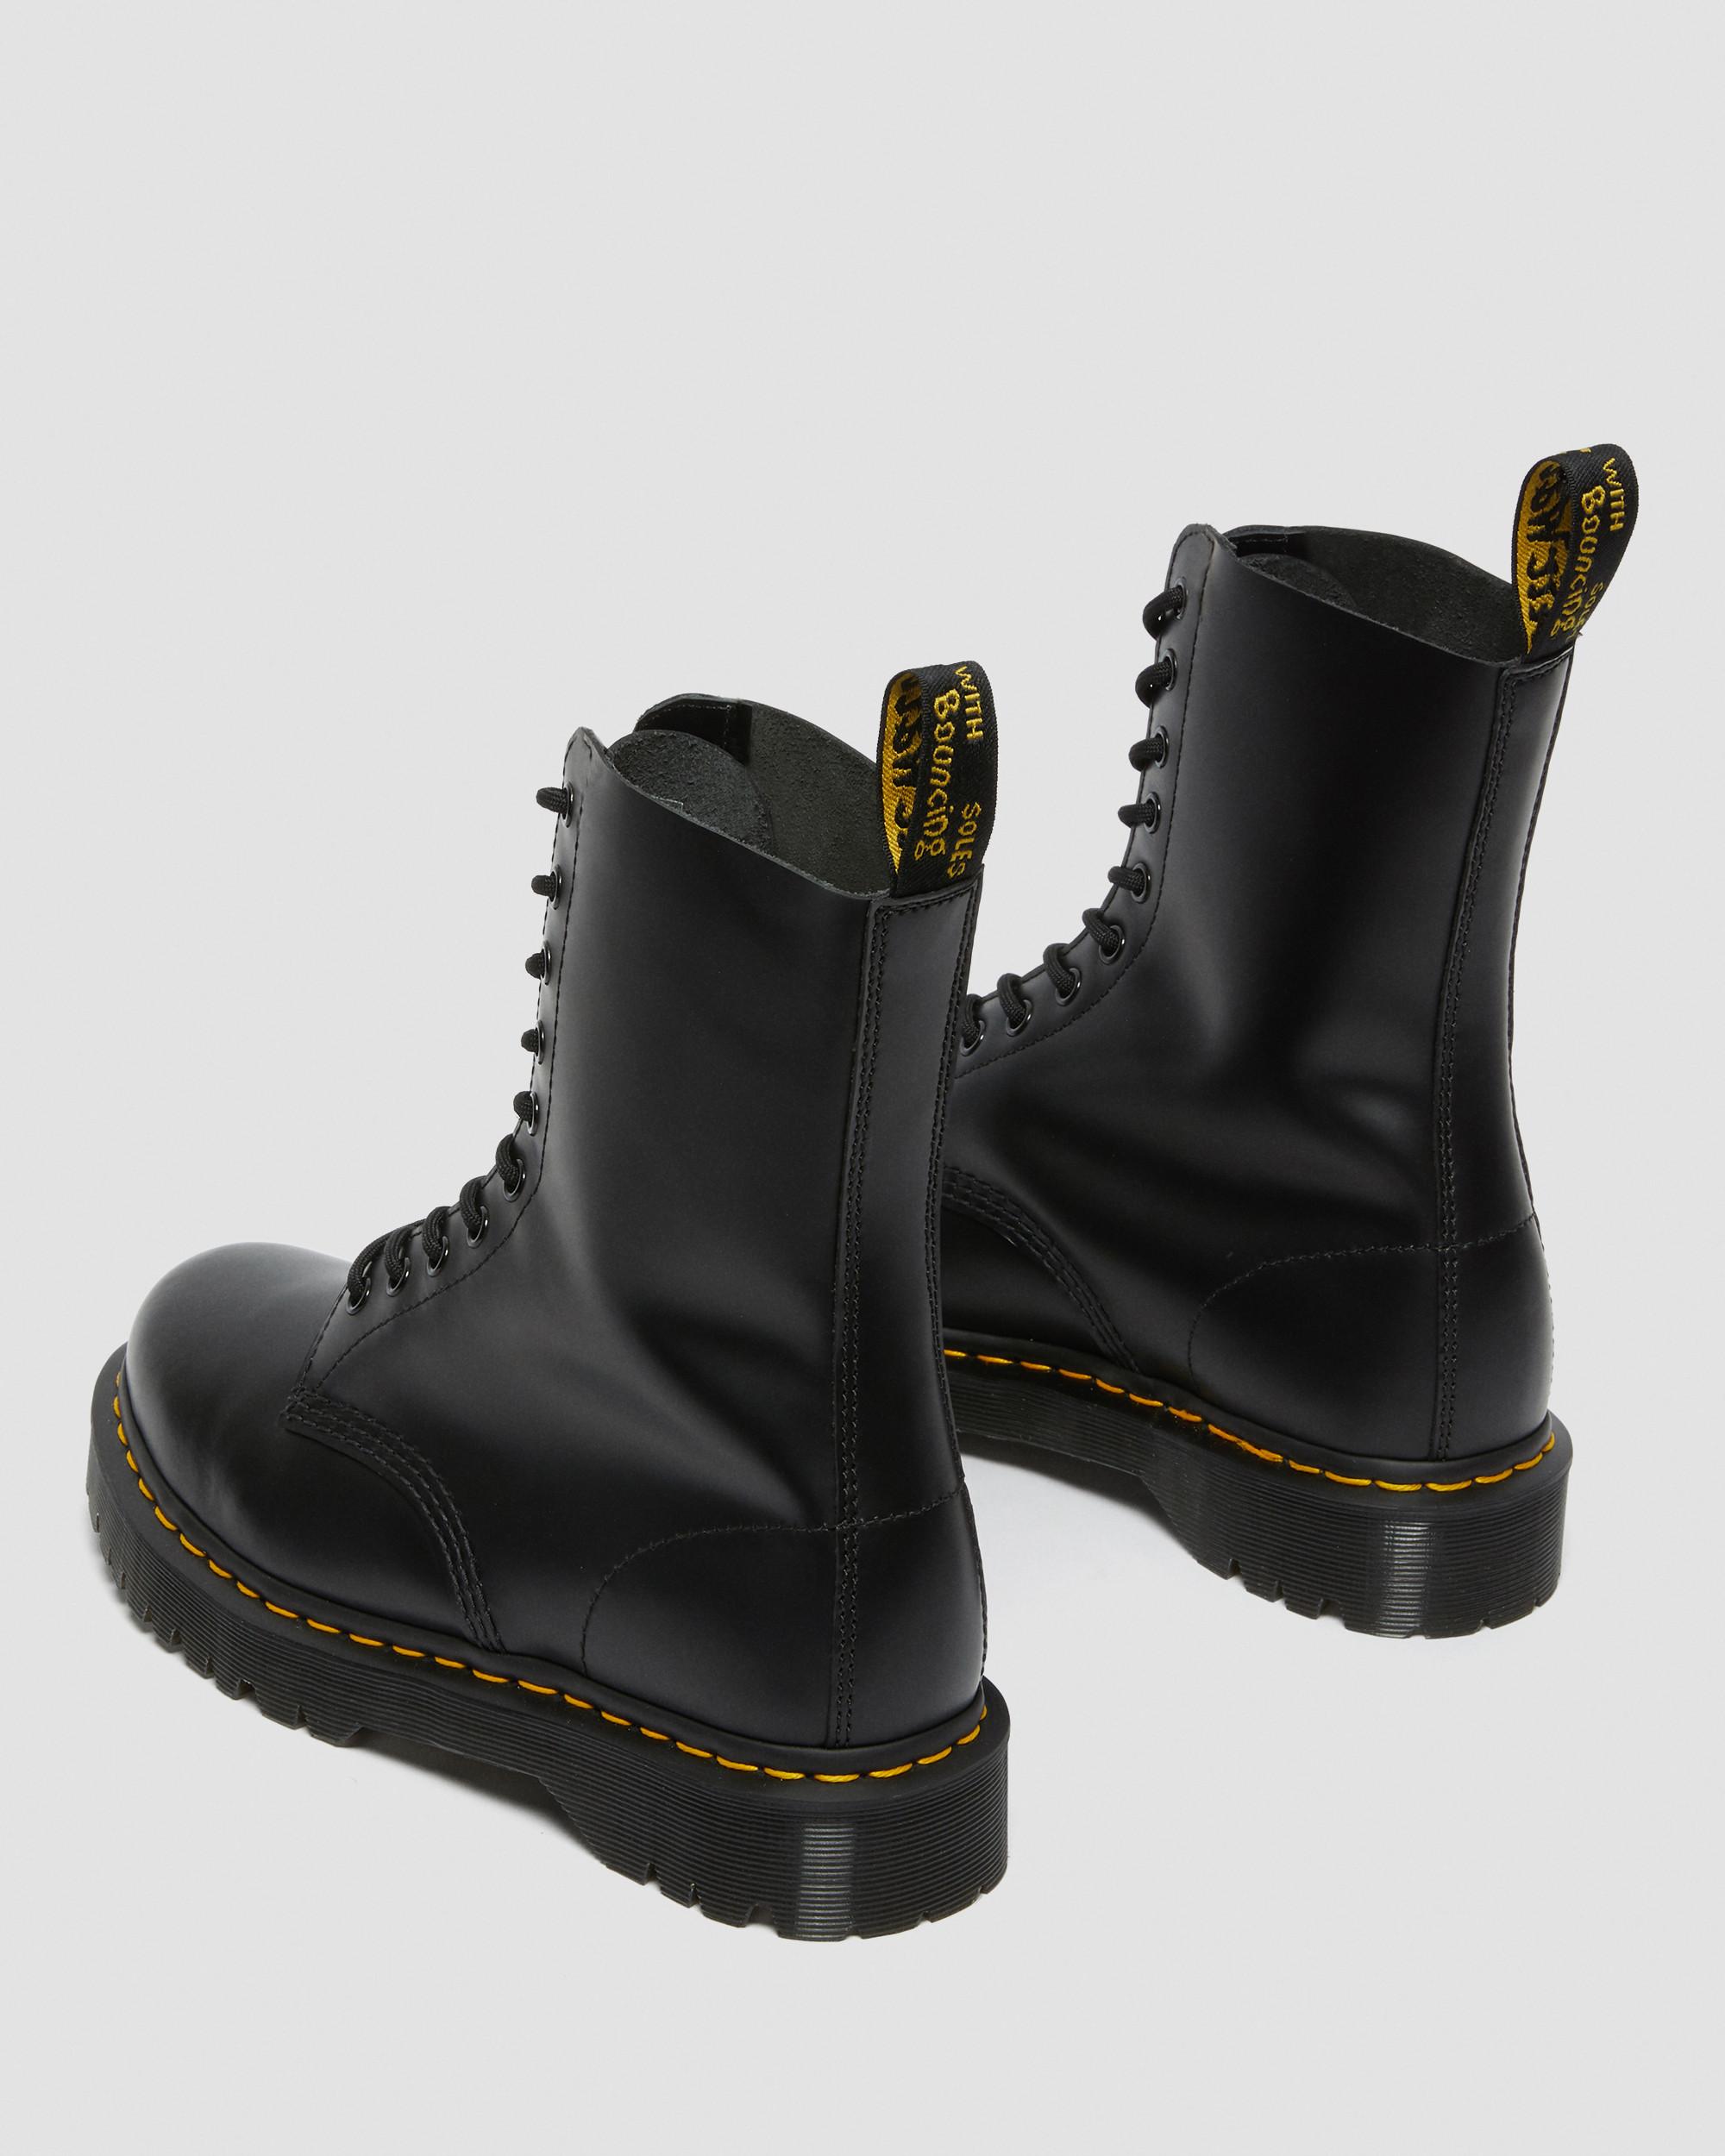 Dr.Martens 1490 10-Eyelet Black Mens Smooth Leather Mid-calf Boots 